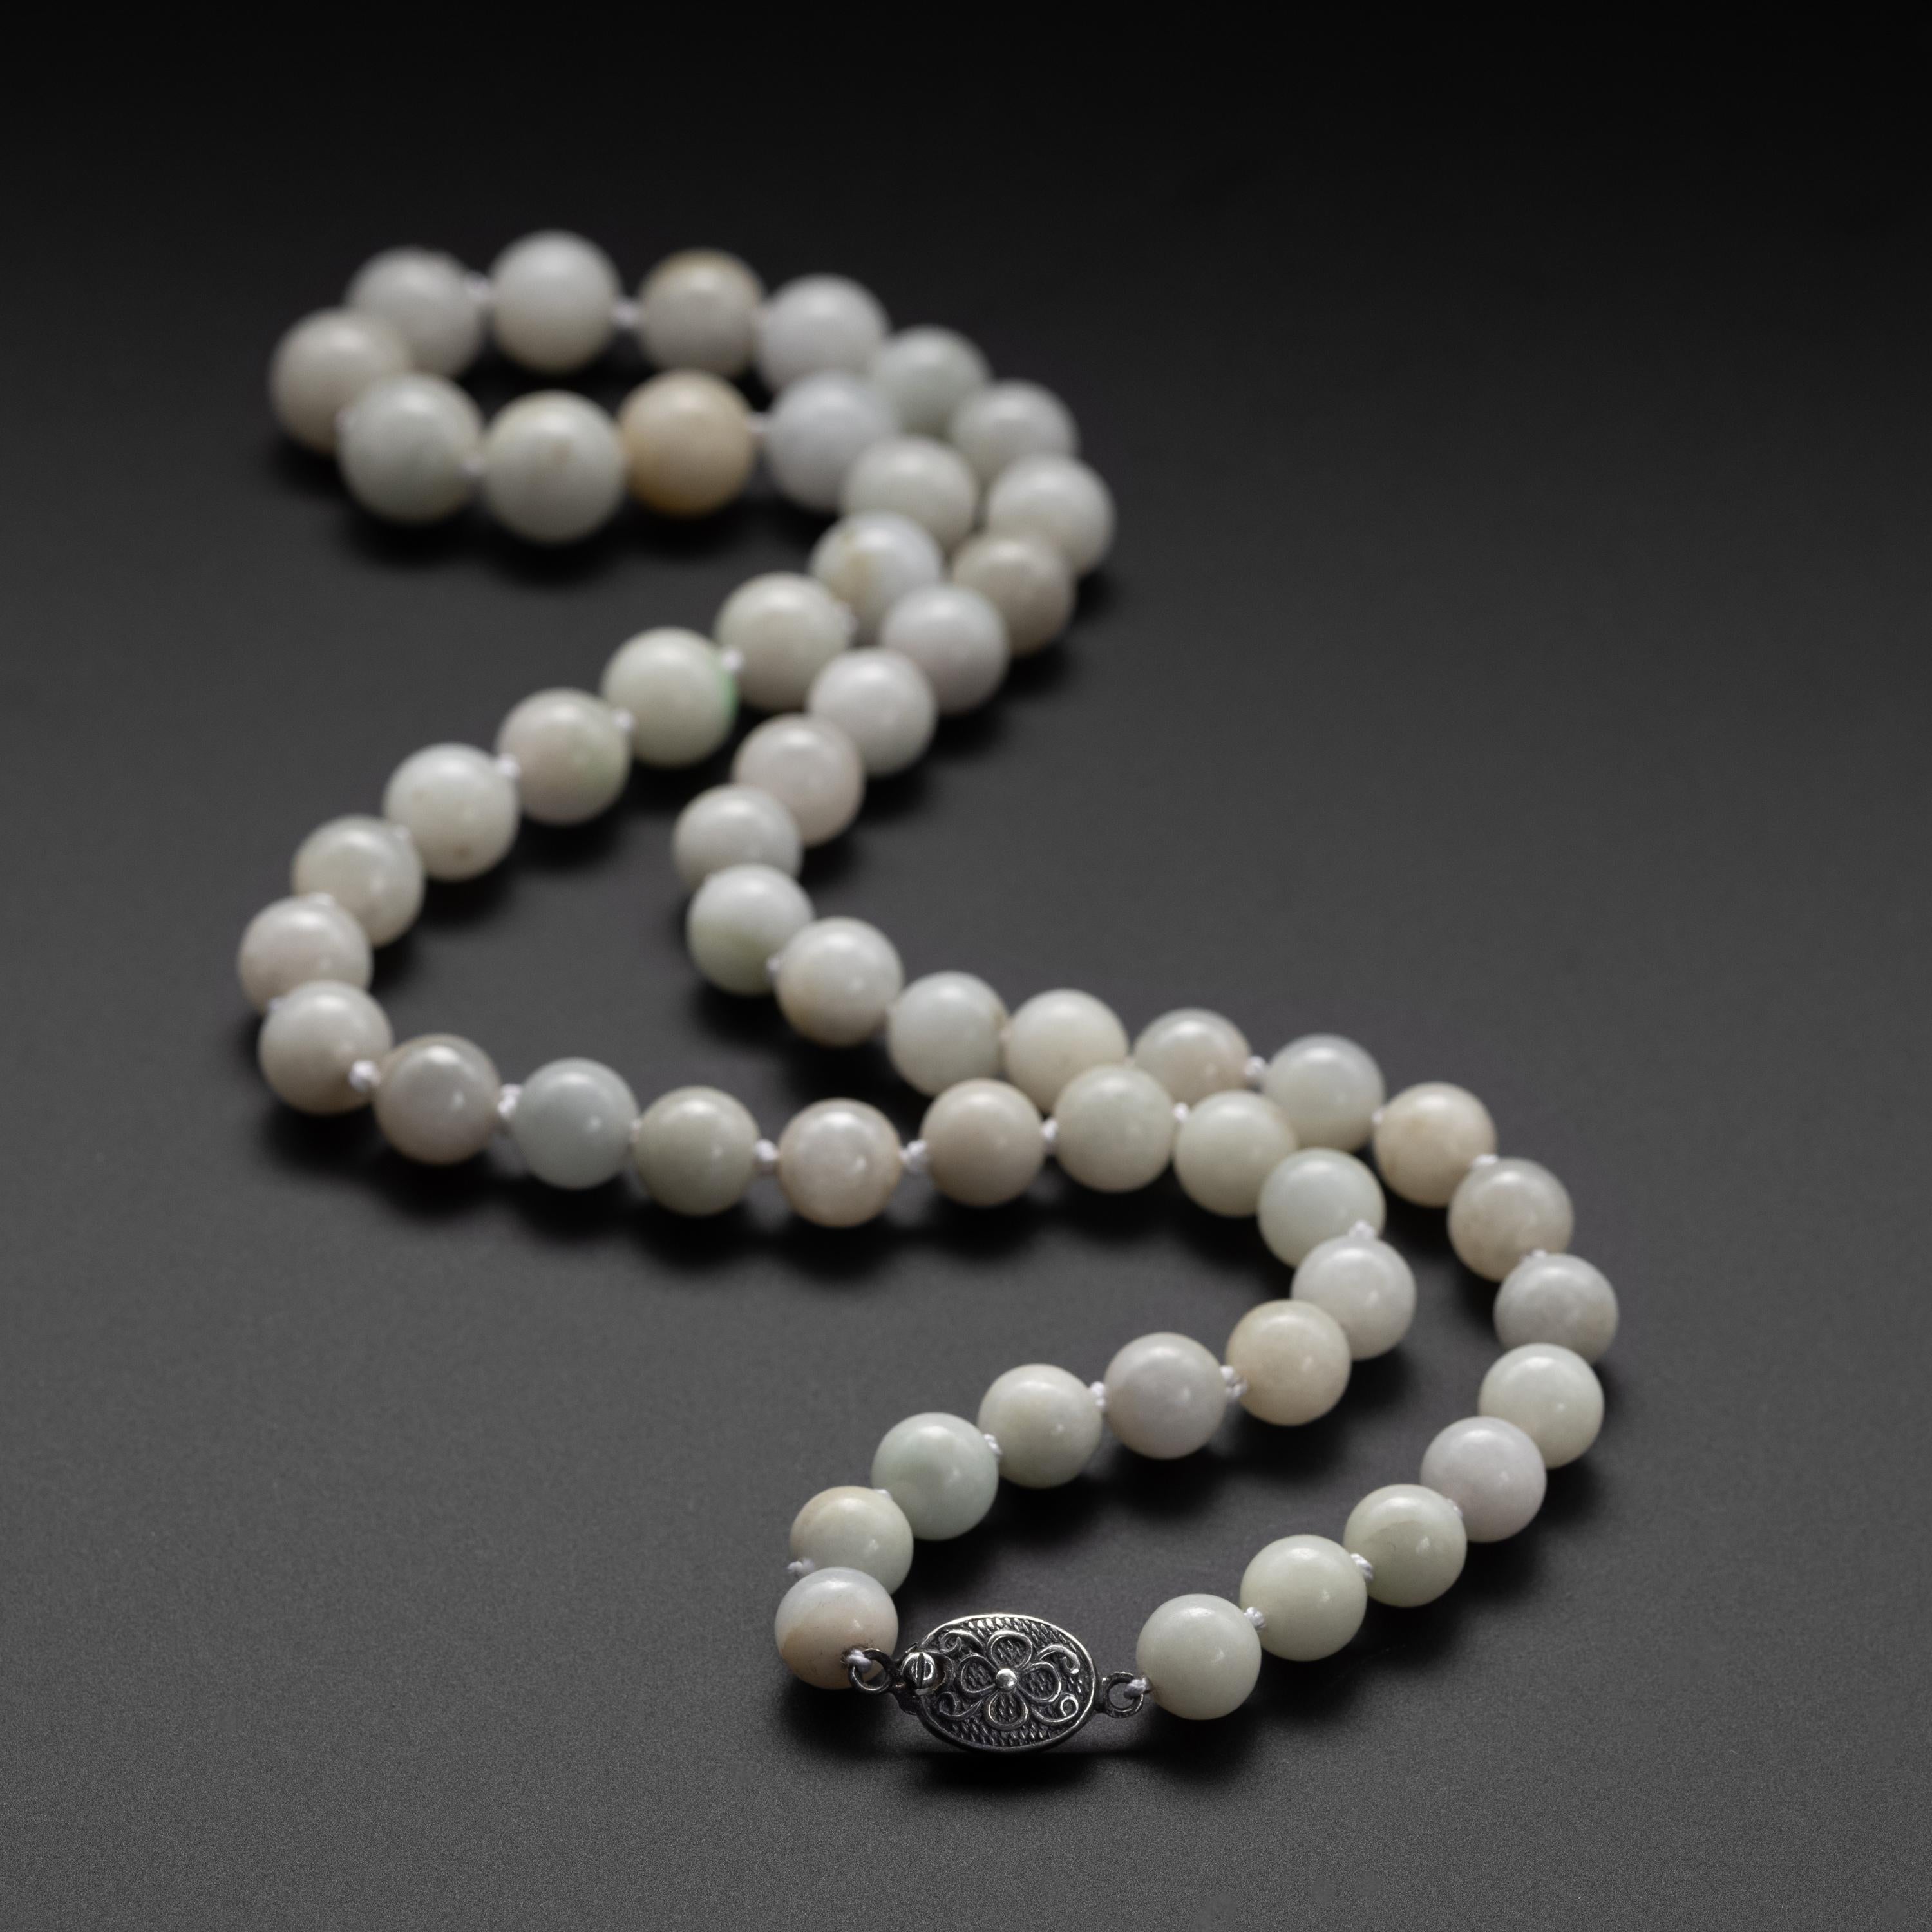 Artisan Antique Jade Necklace Like Marbles Made of Fog, Circa 1920s